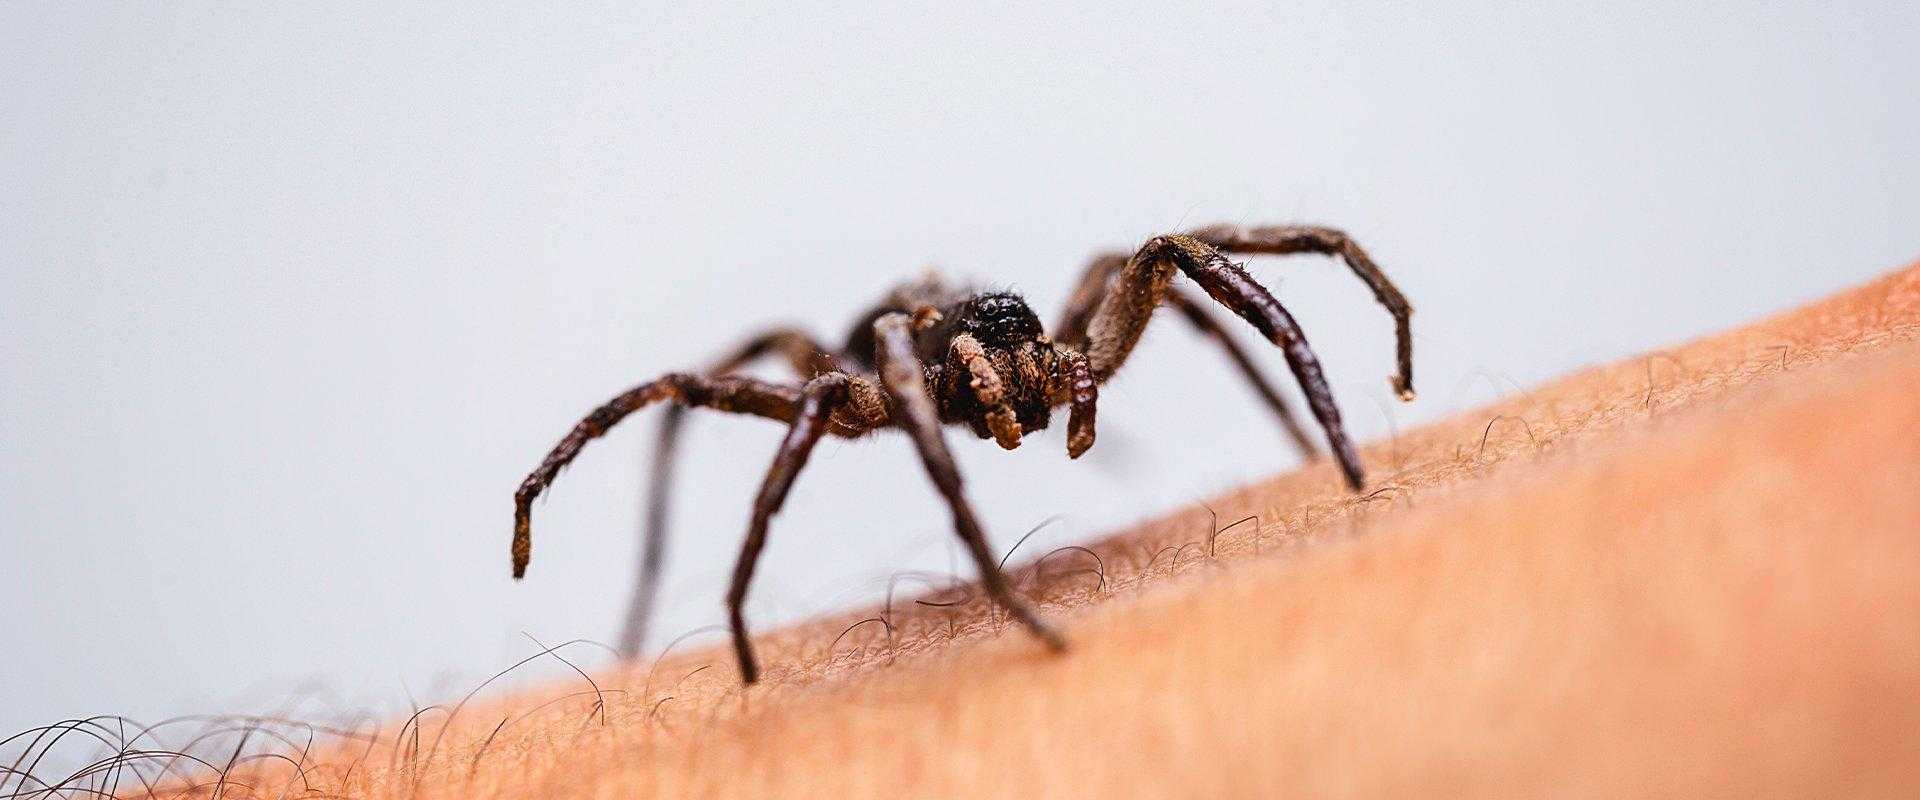 spider on arm in south florida